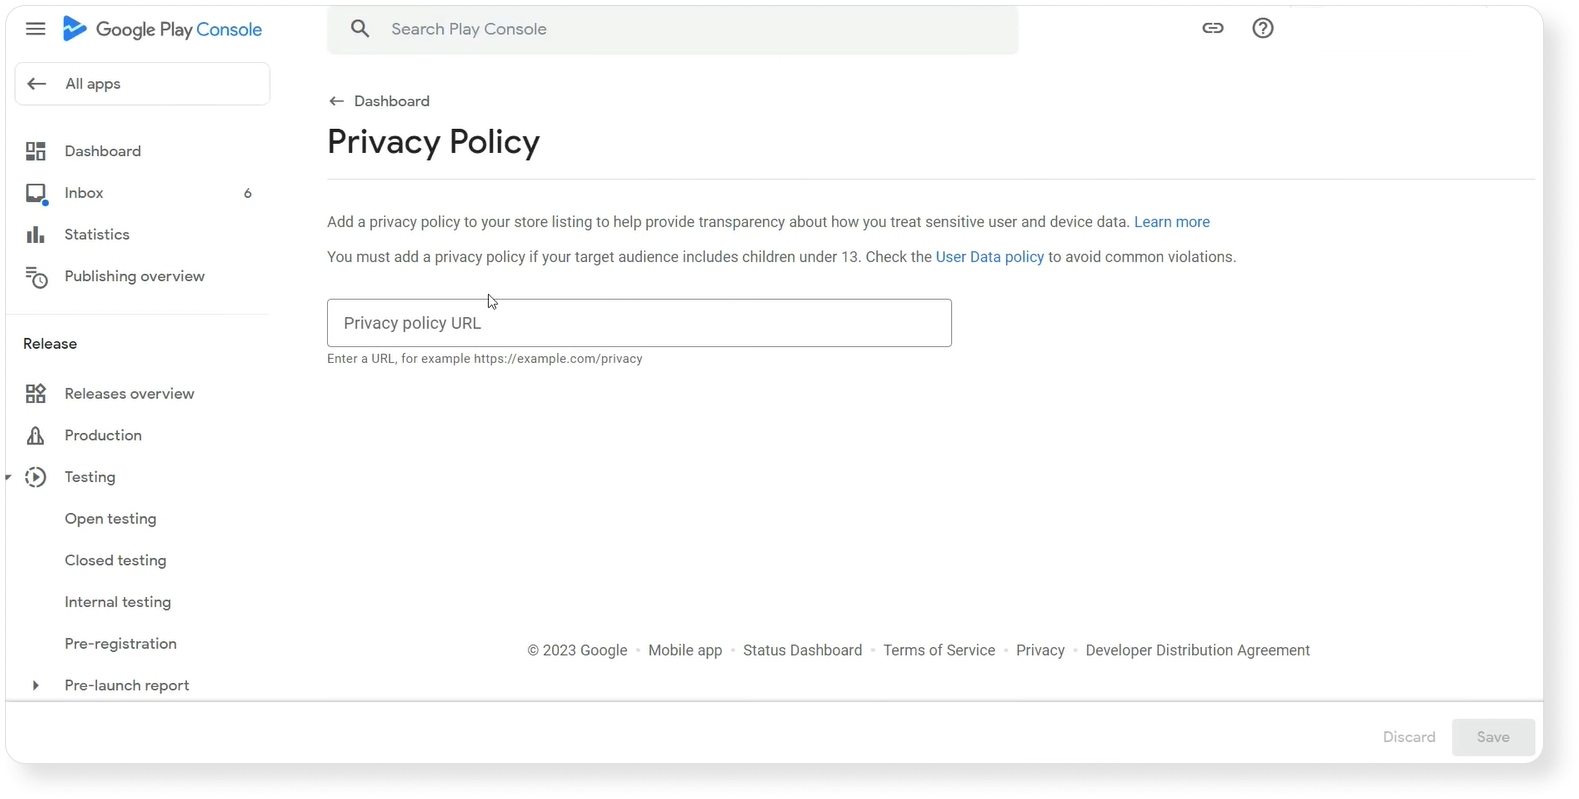 Privacy Policy section on Google Play Console